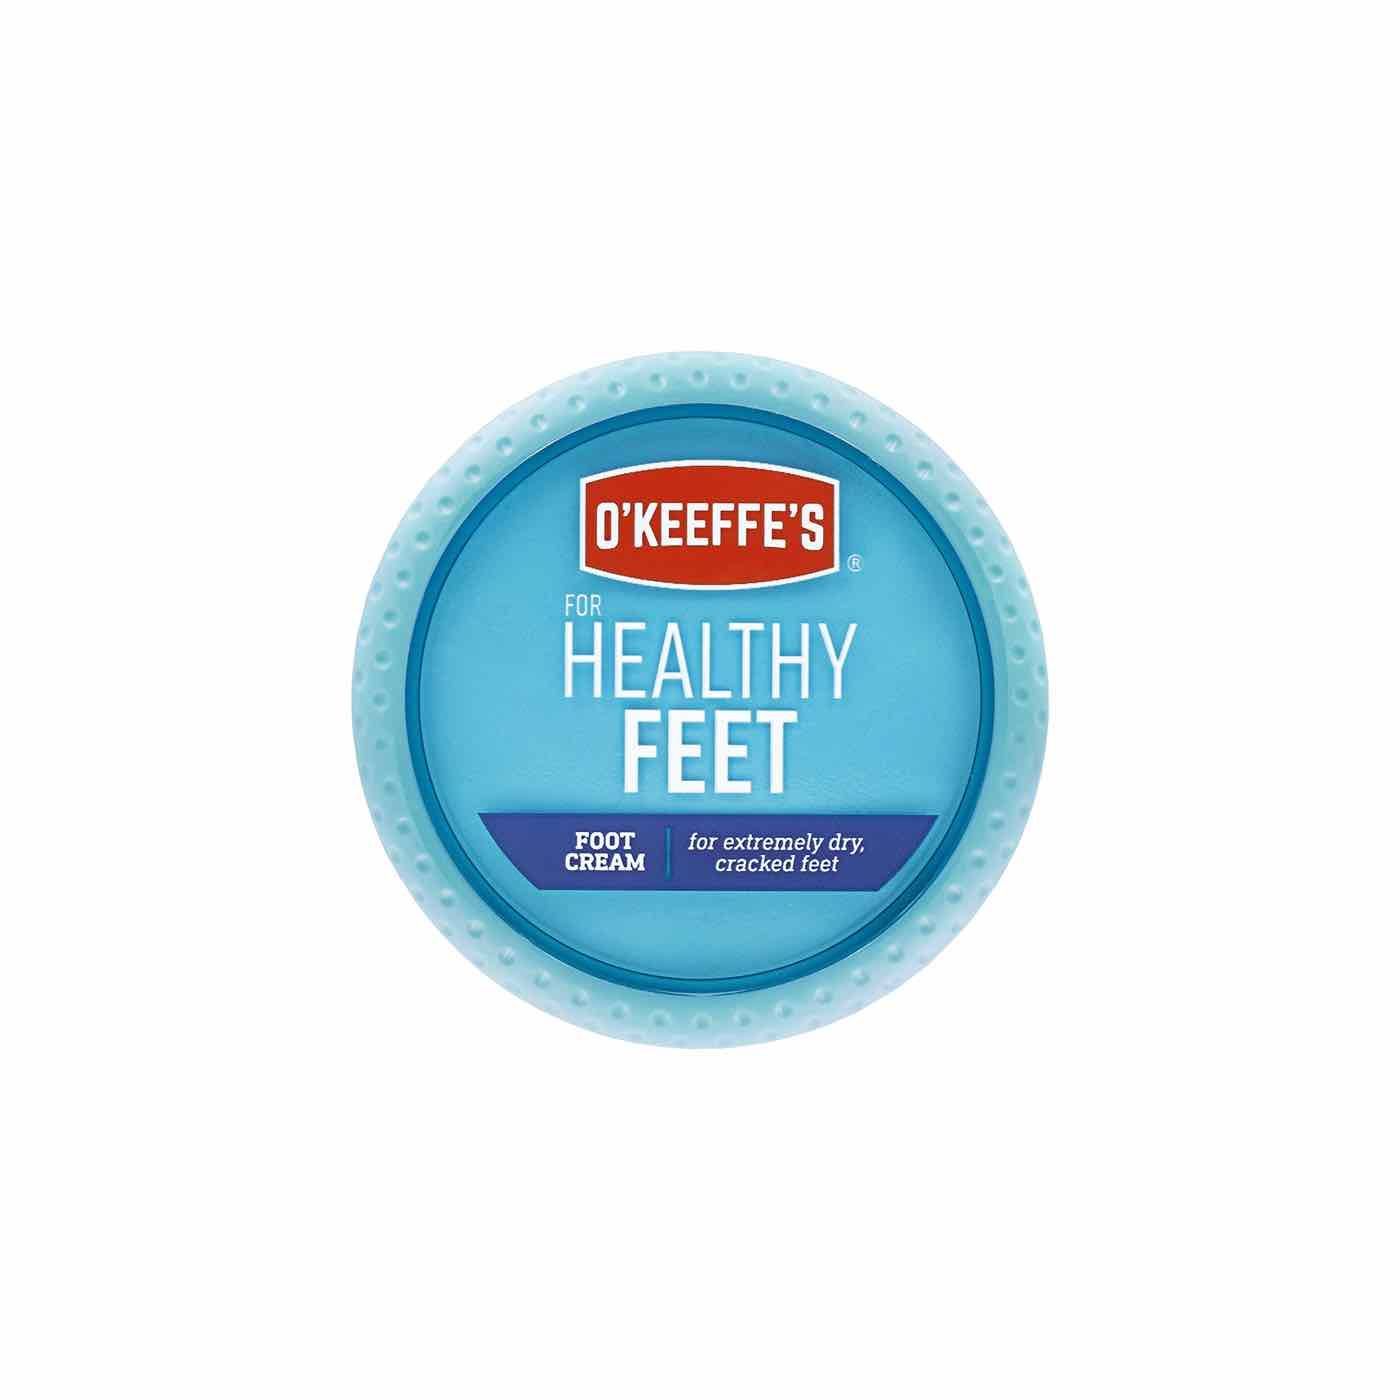 best rated foot cream for cracked heels